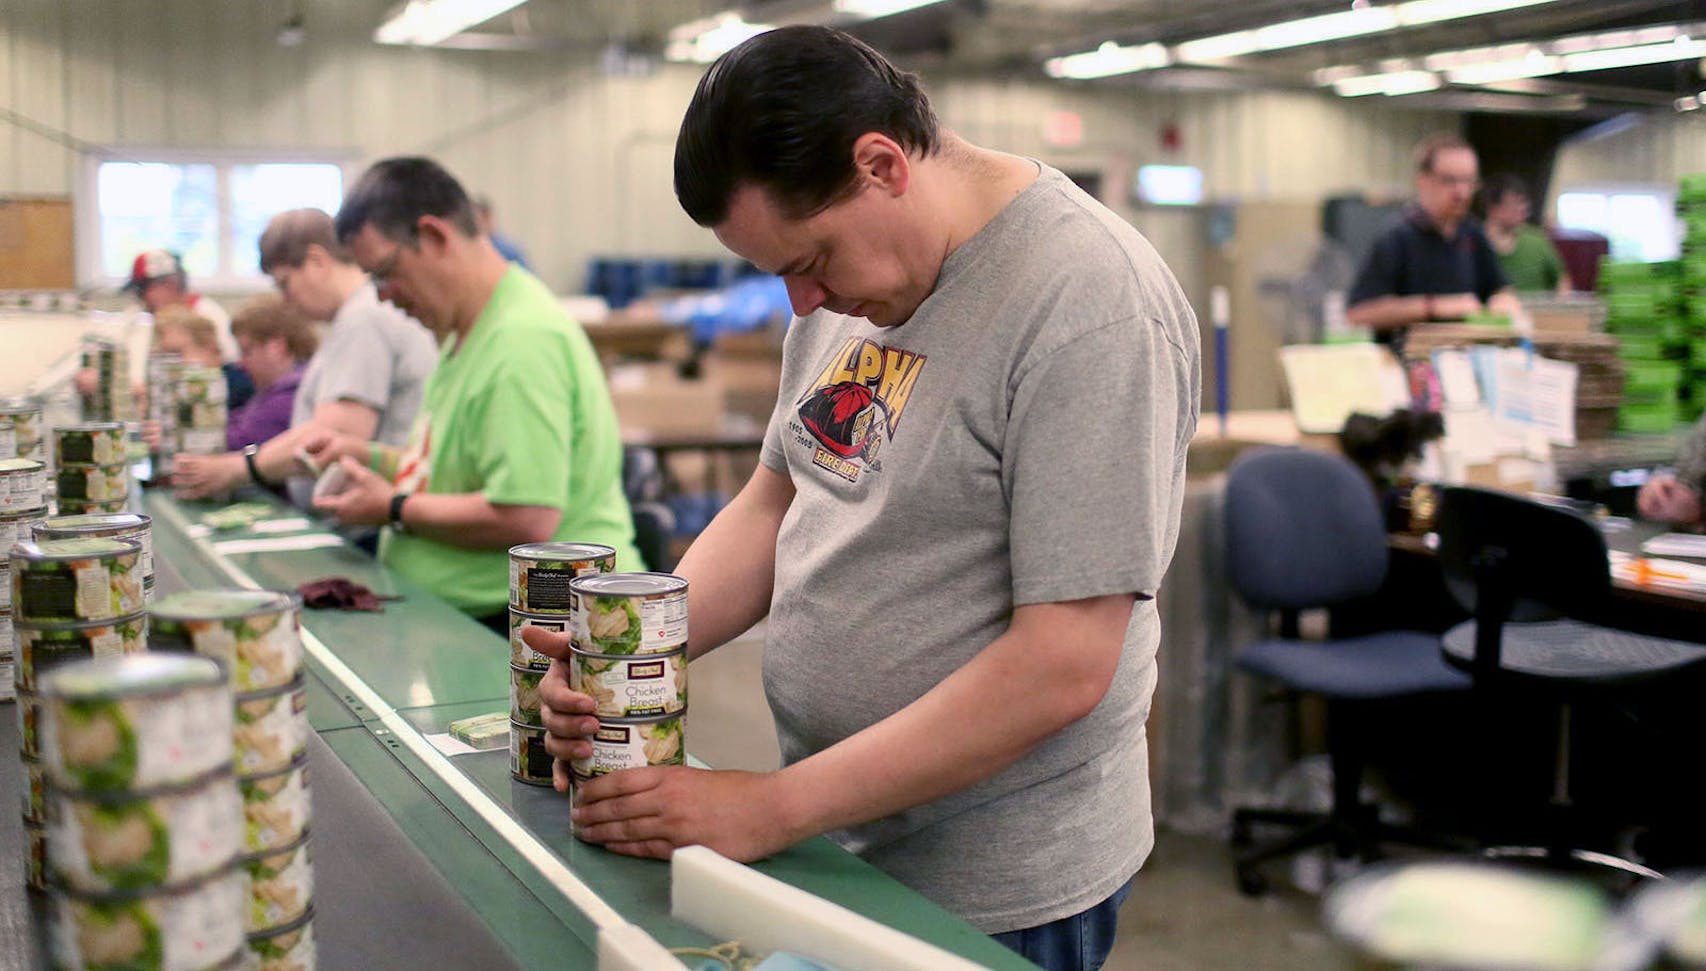 Dustin Leibfried, 42, who has toiled for years at a sheltered workshop in Fairmont, Minn.,  stacked cans of chicken on a fast-moving conveyor belt known as the “T-Rex.” “There are some days when you feel like you’re just racing, racing to catch up.”